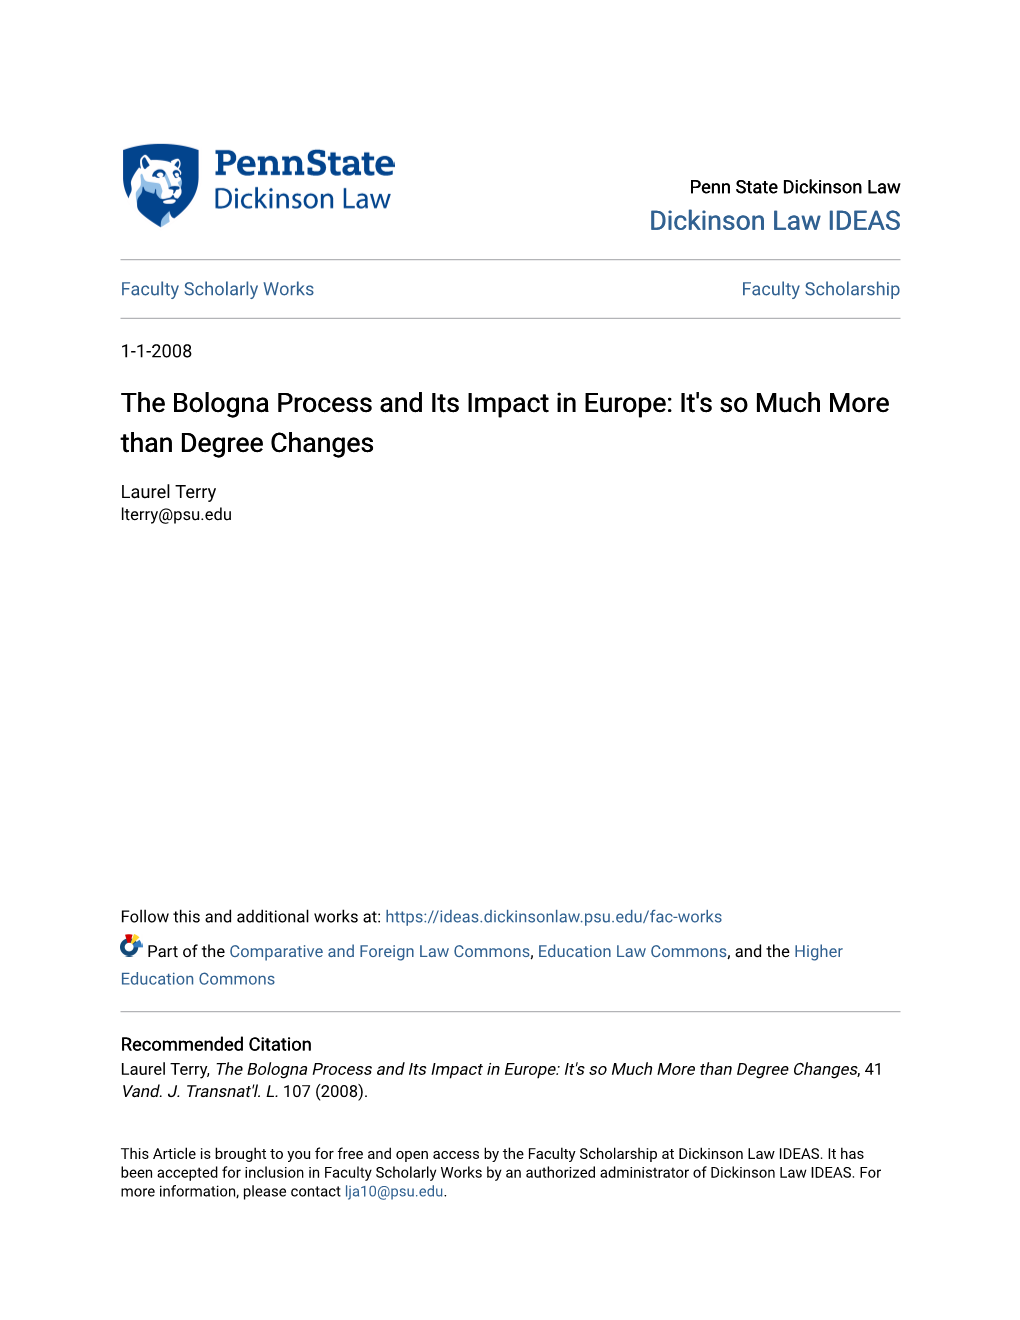 The Bologna Process and Its Impact in Europe: It's So Much More Than Degree Changes